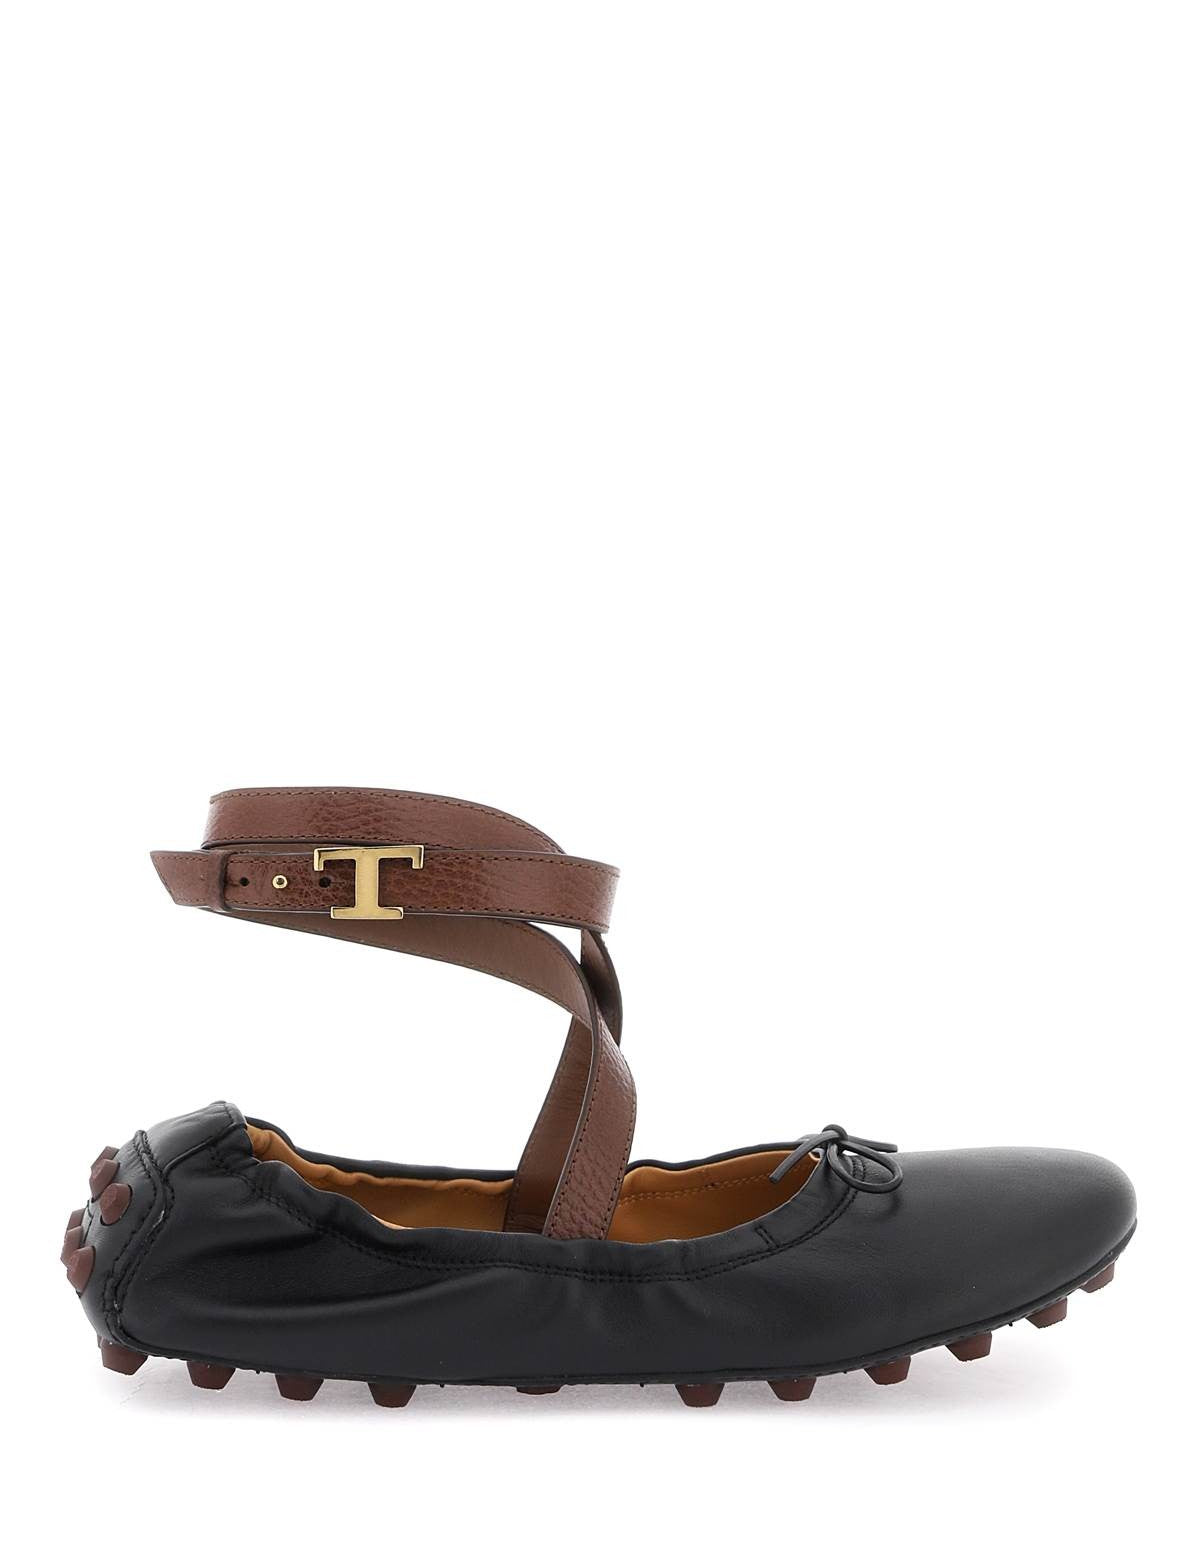 tod-s-bubble-leather-ballet-flats-shoes-with-strap.jpg